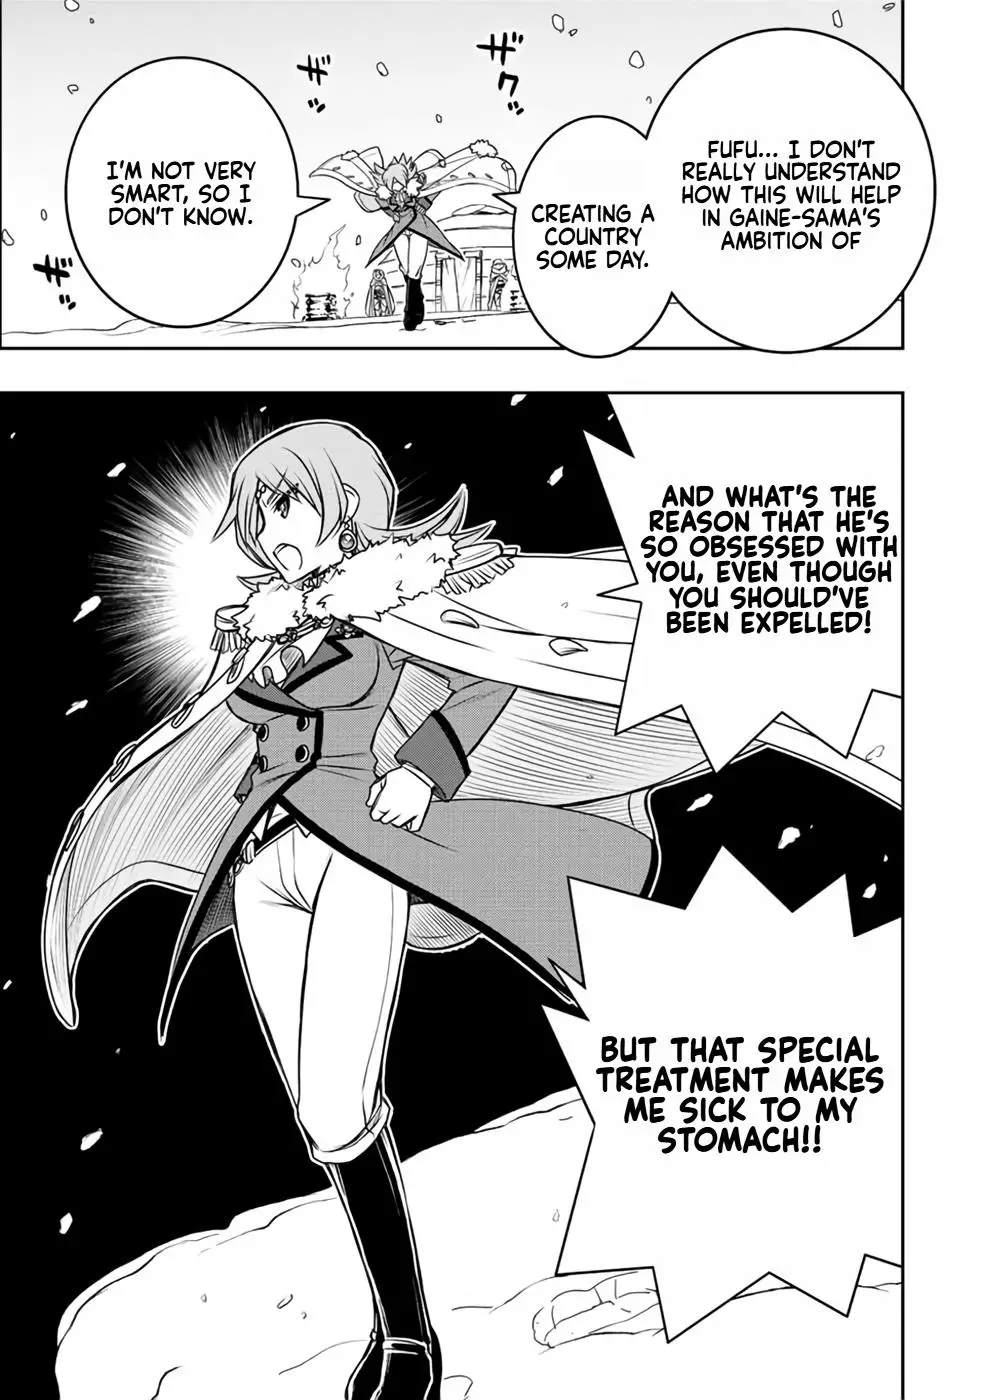 The Useless Skill [Auto Mode] Has Been Awakened ~Huh, Guild's Scout, Didn't You Say I Wasn't Needed Anymore?~ - 20 page 8-6e00d0d1